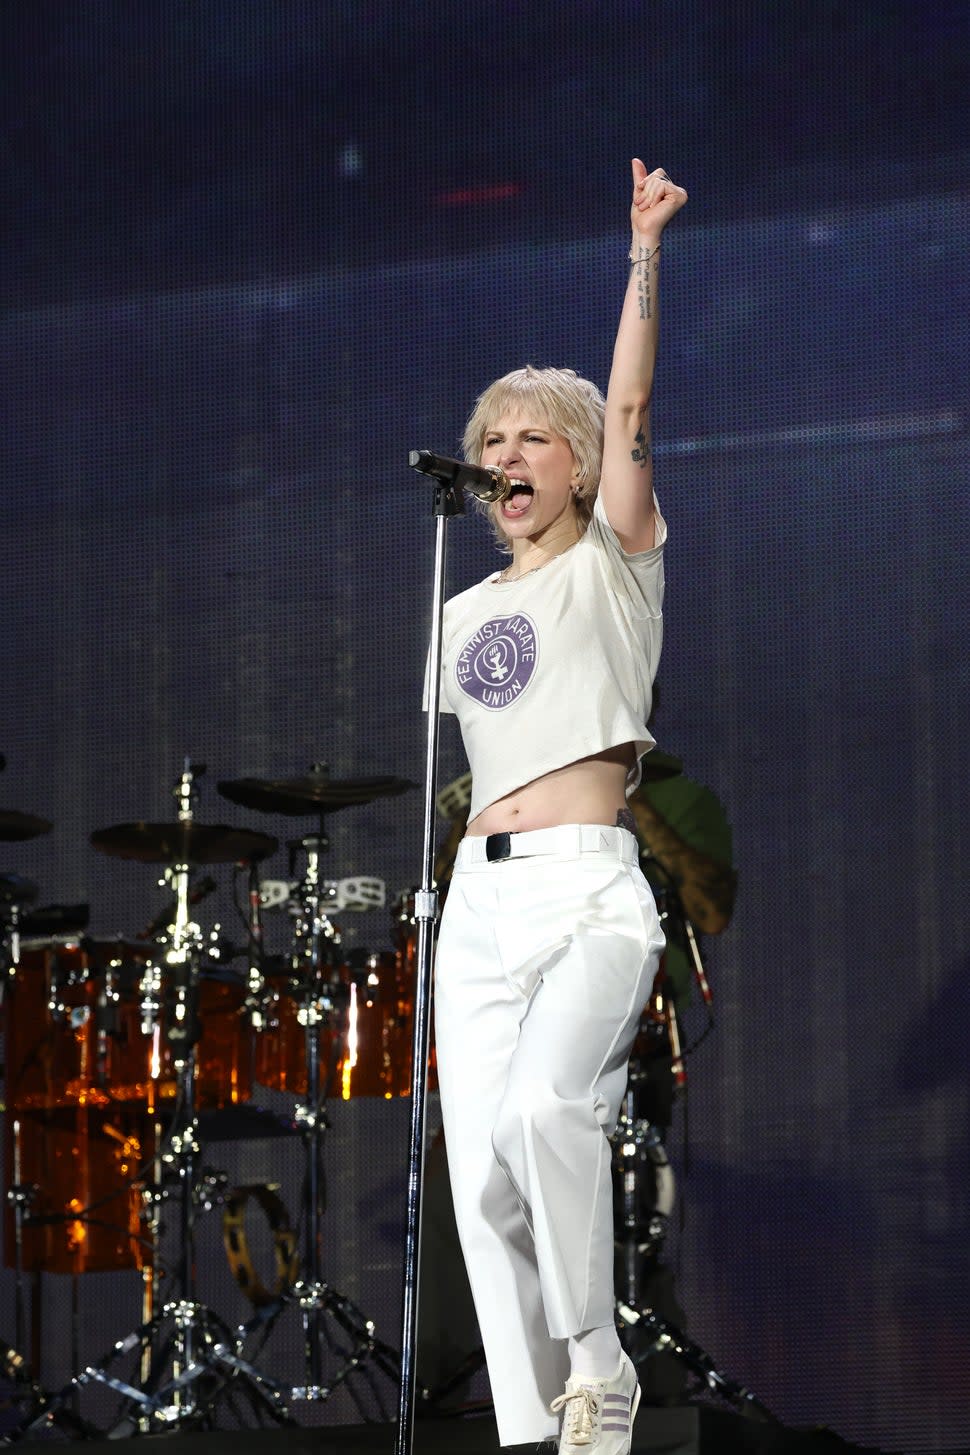 Hayley Williams of Paramore performing during the Eras Tour